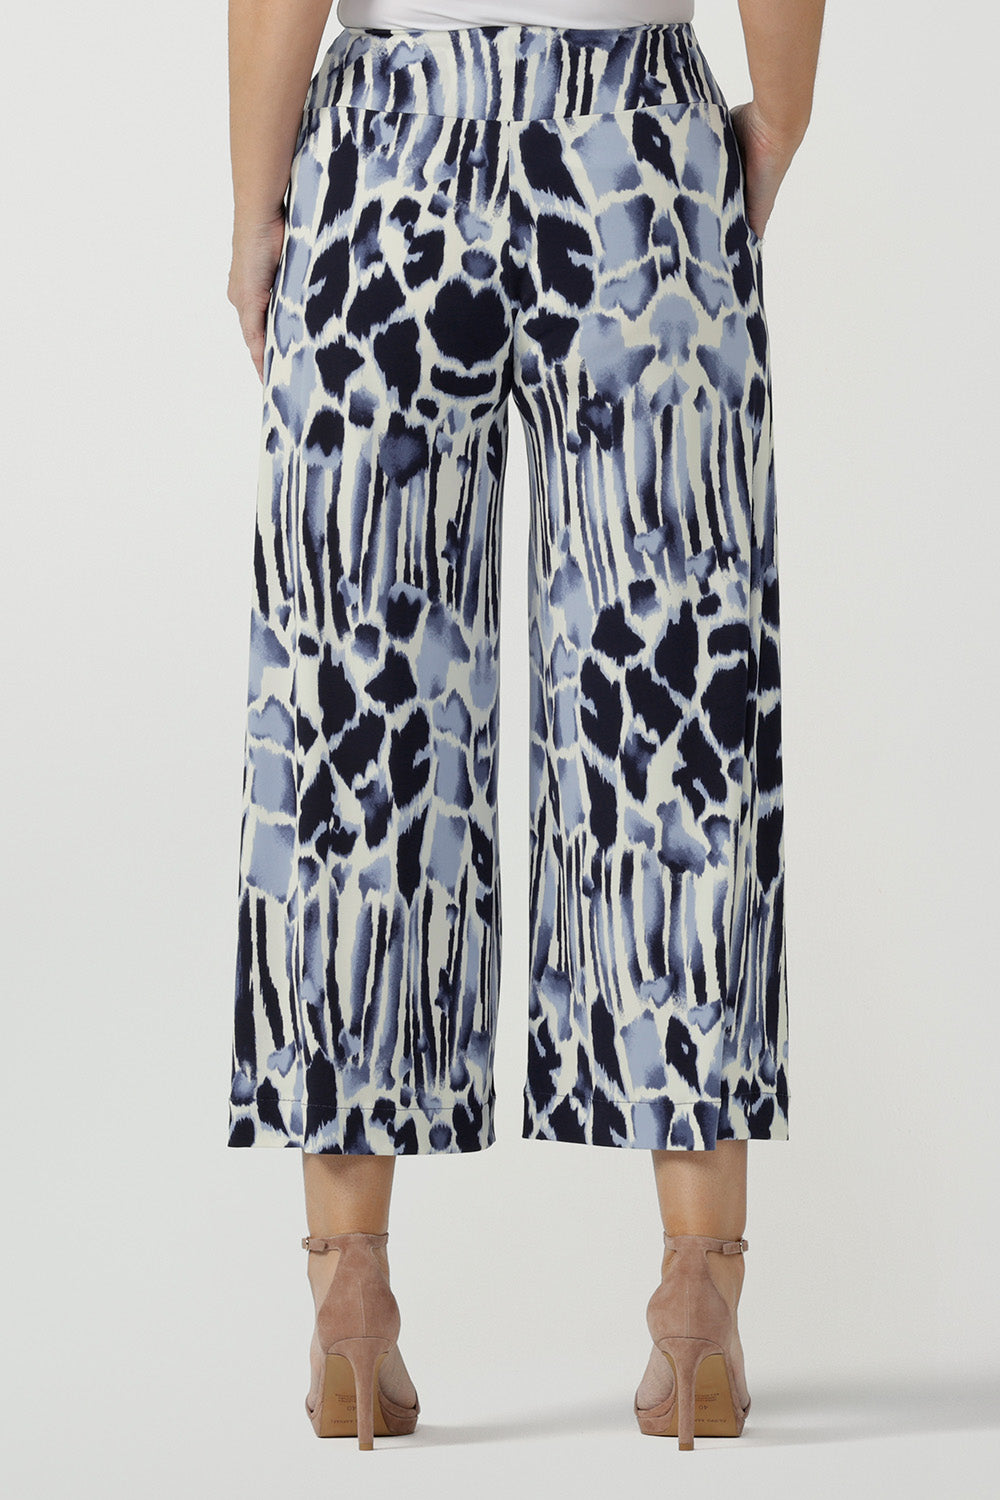 Back view of cropped length, wide leg culotte pants in navy blue and white print. Made in Australia, these quality pants are easy care and comfortable for petite to plus size women - shop for your curves in sizes 8 to 24 at Leina & Fleur's online store!